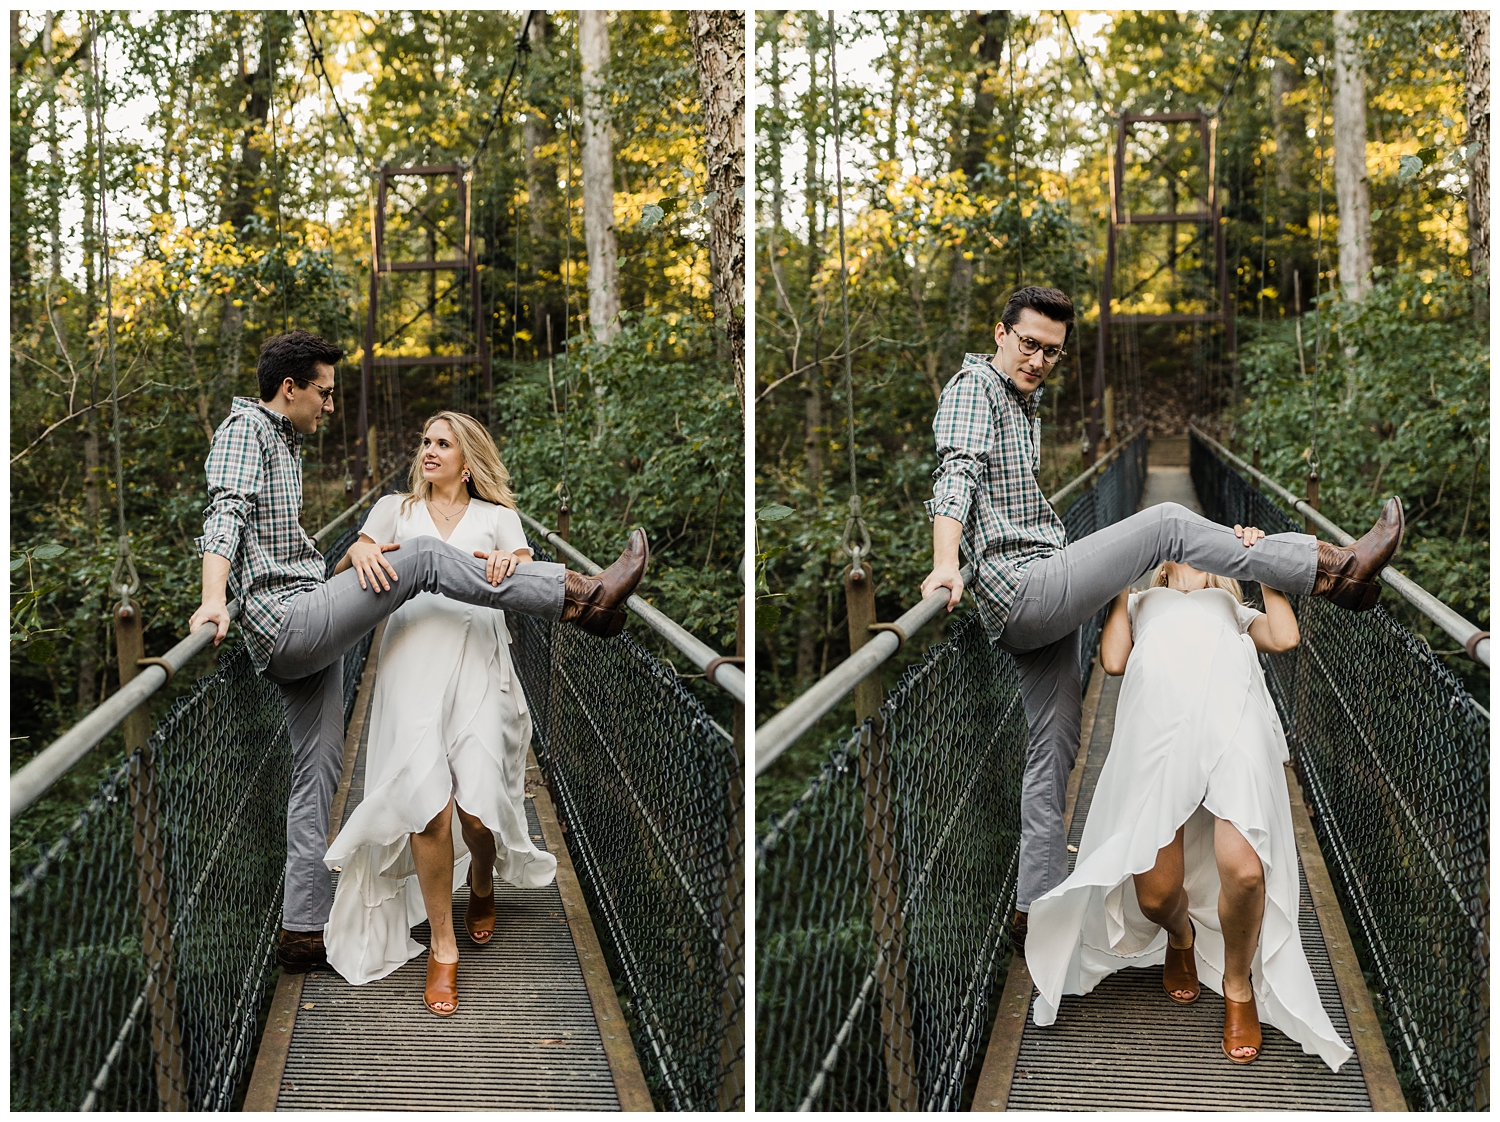 Cute, young couple on a suspension bridge during an engagement session in Lullwater Park in Atlanta, Georgia